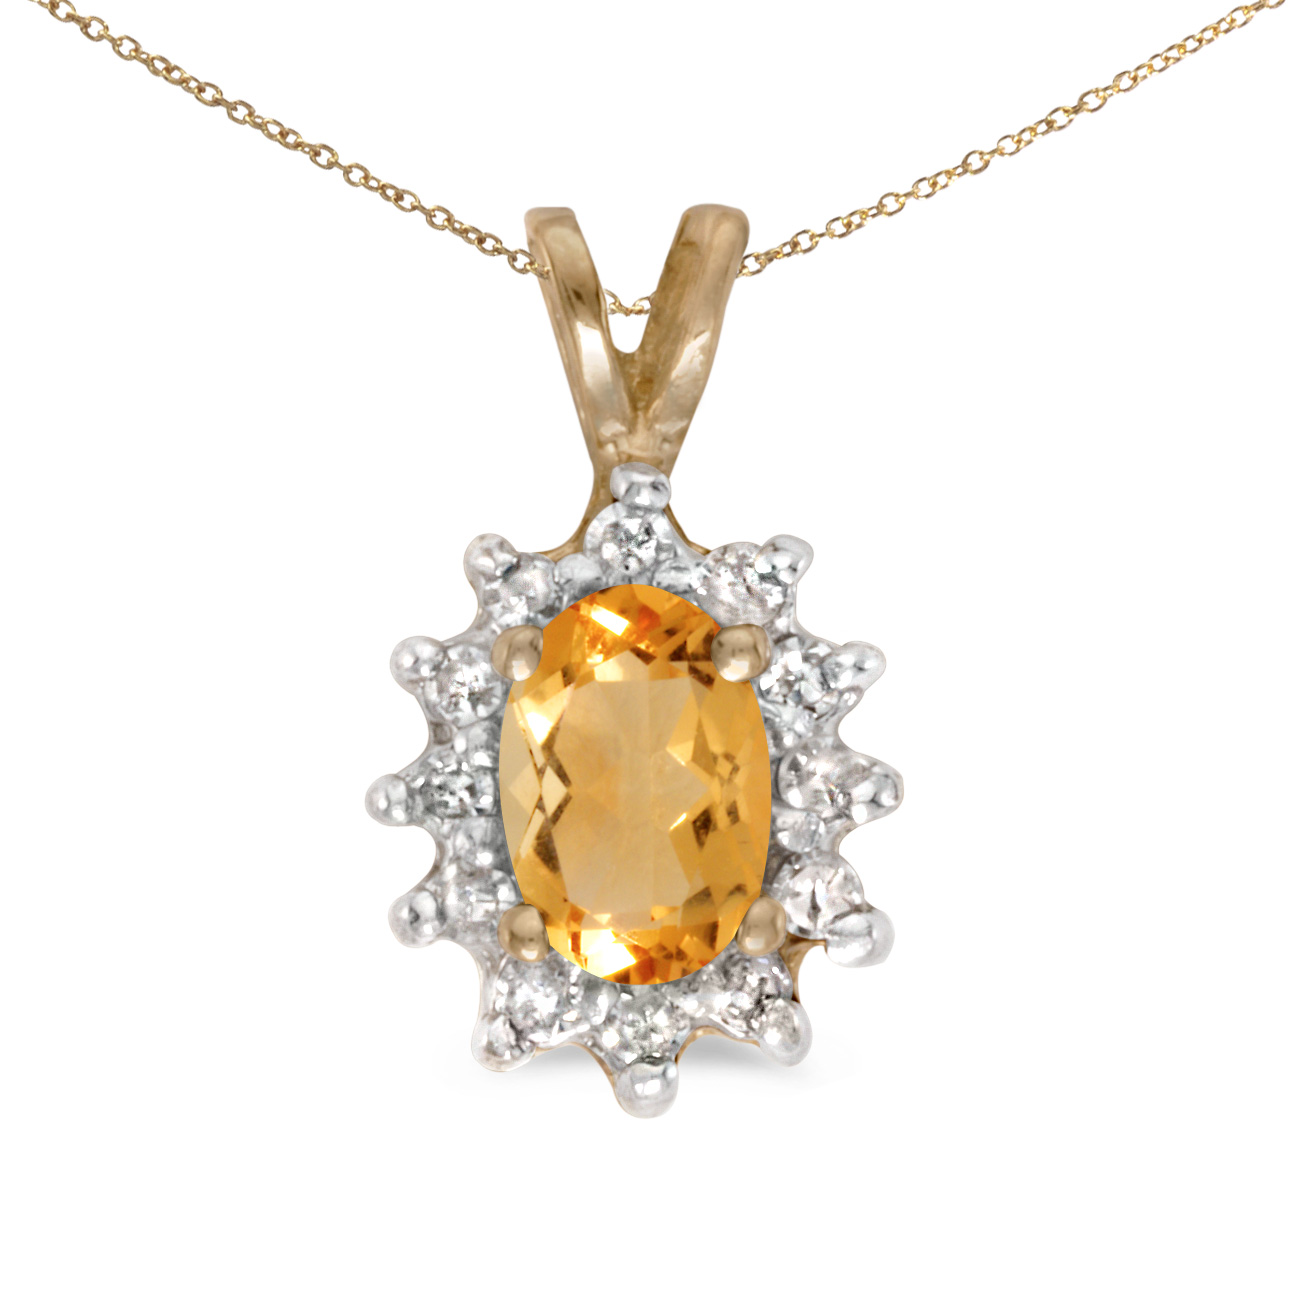 JCX2738: This 14k yellow gold oval citrine and diamond pendant features a 6x4 mm genuine natural citrine with a 0.31 ct total weight.